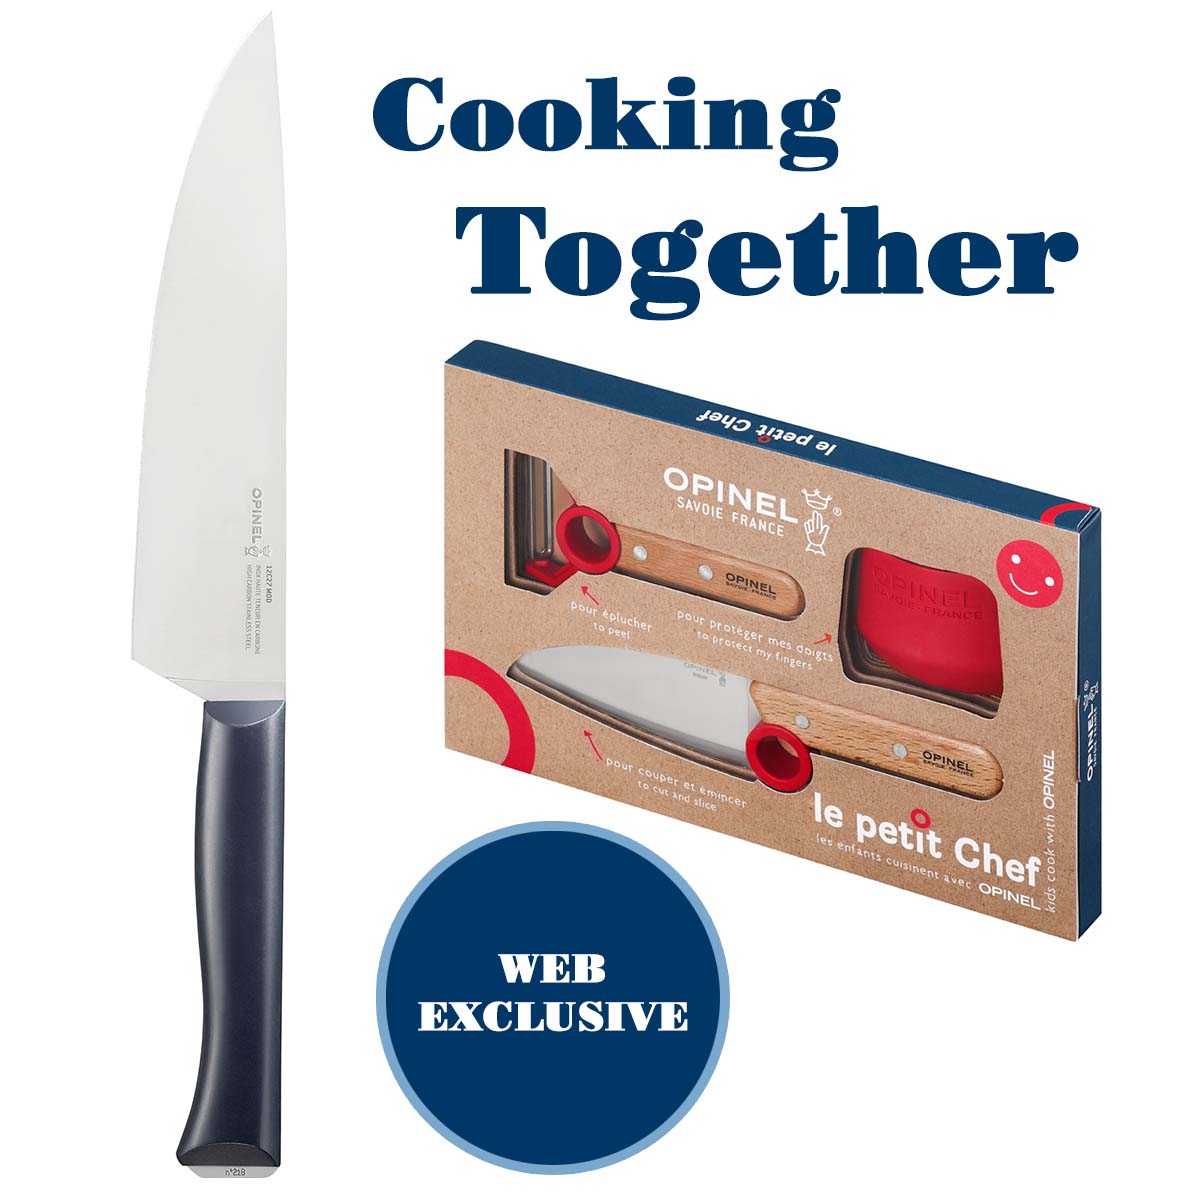 Opinel Large Kitchen and Chef Knives - OPINEL USA